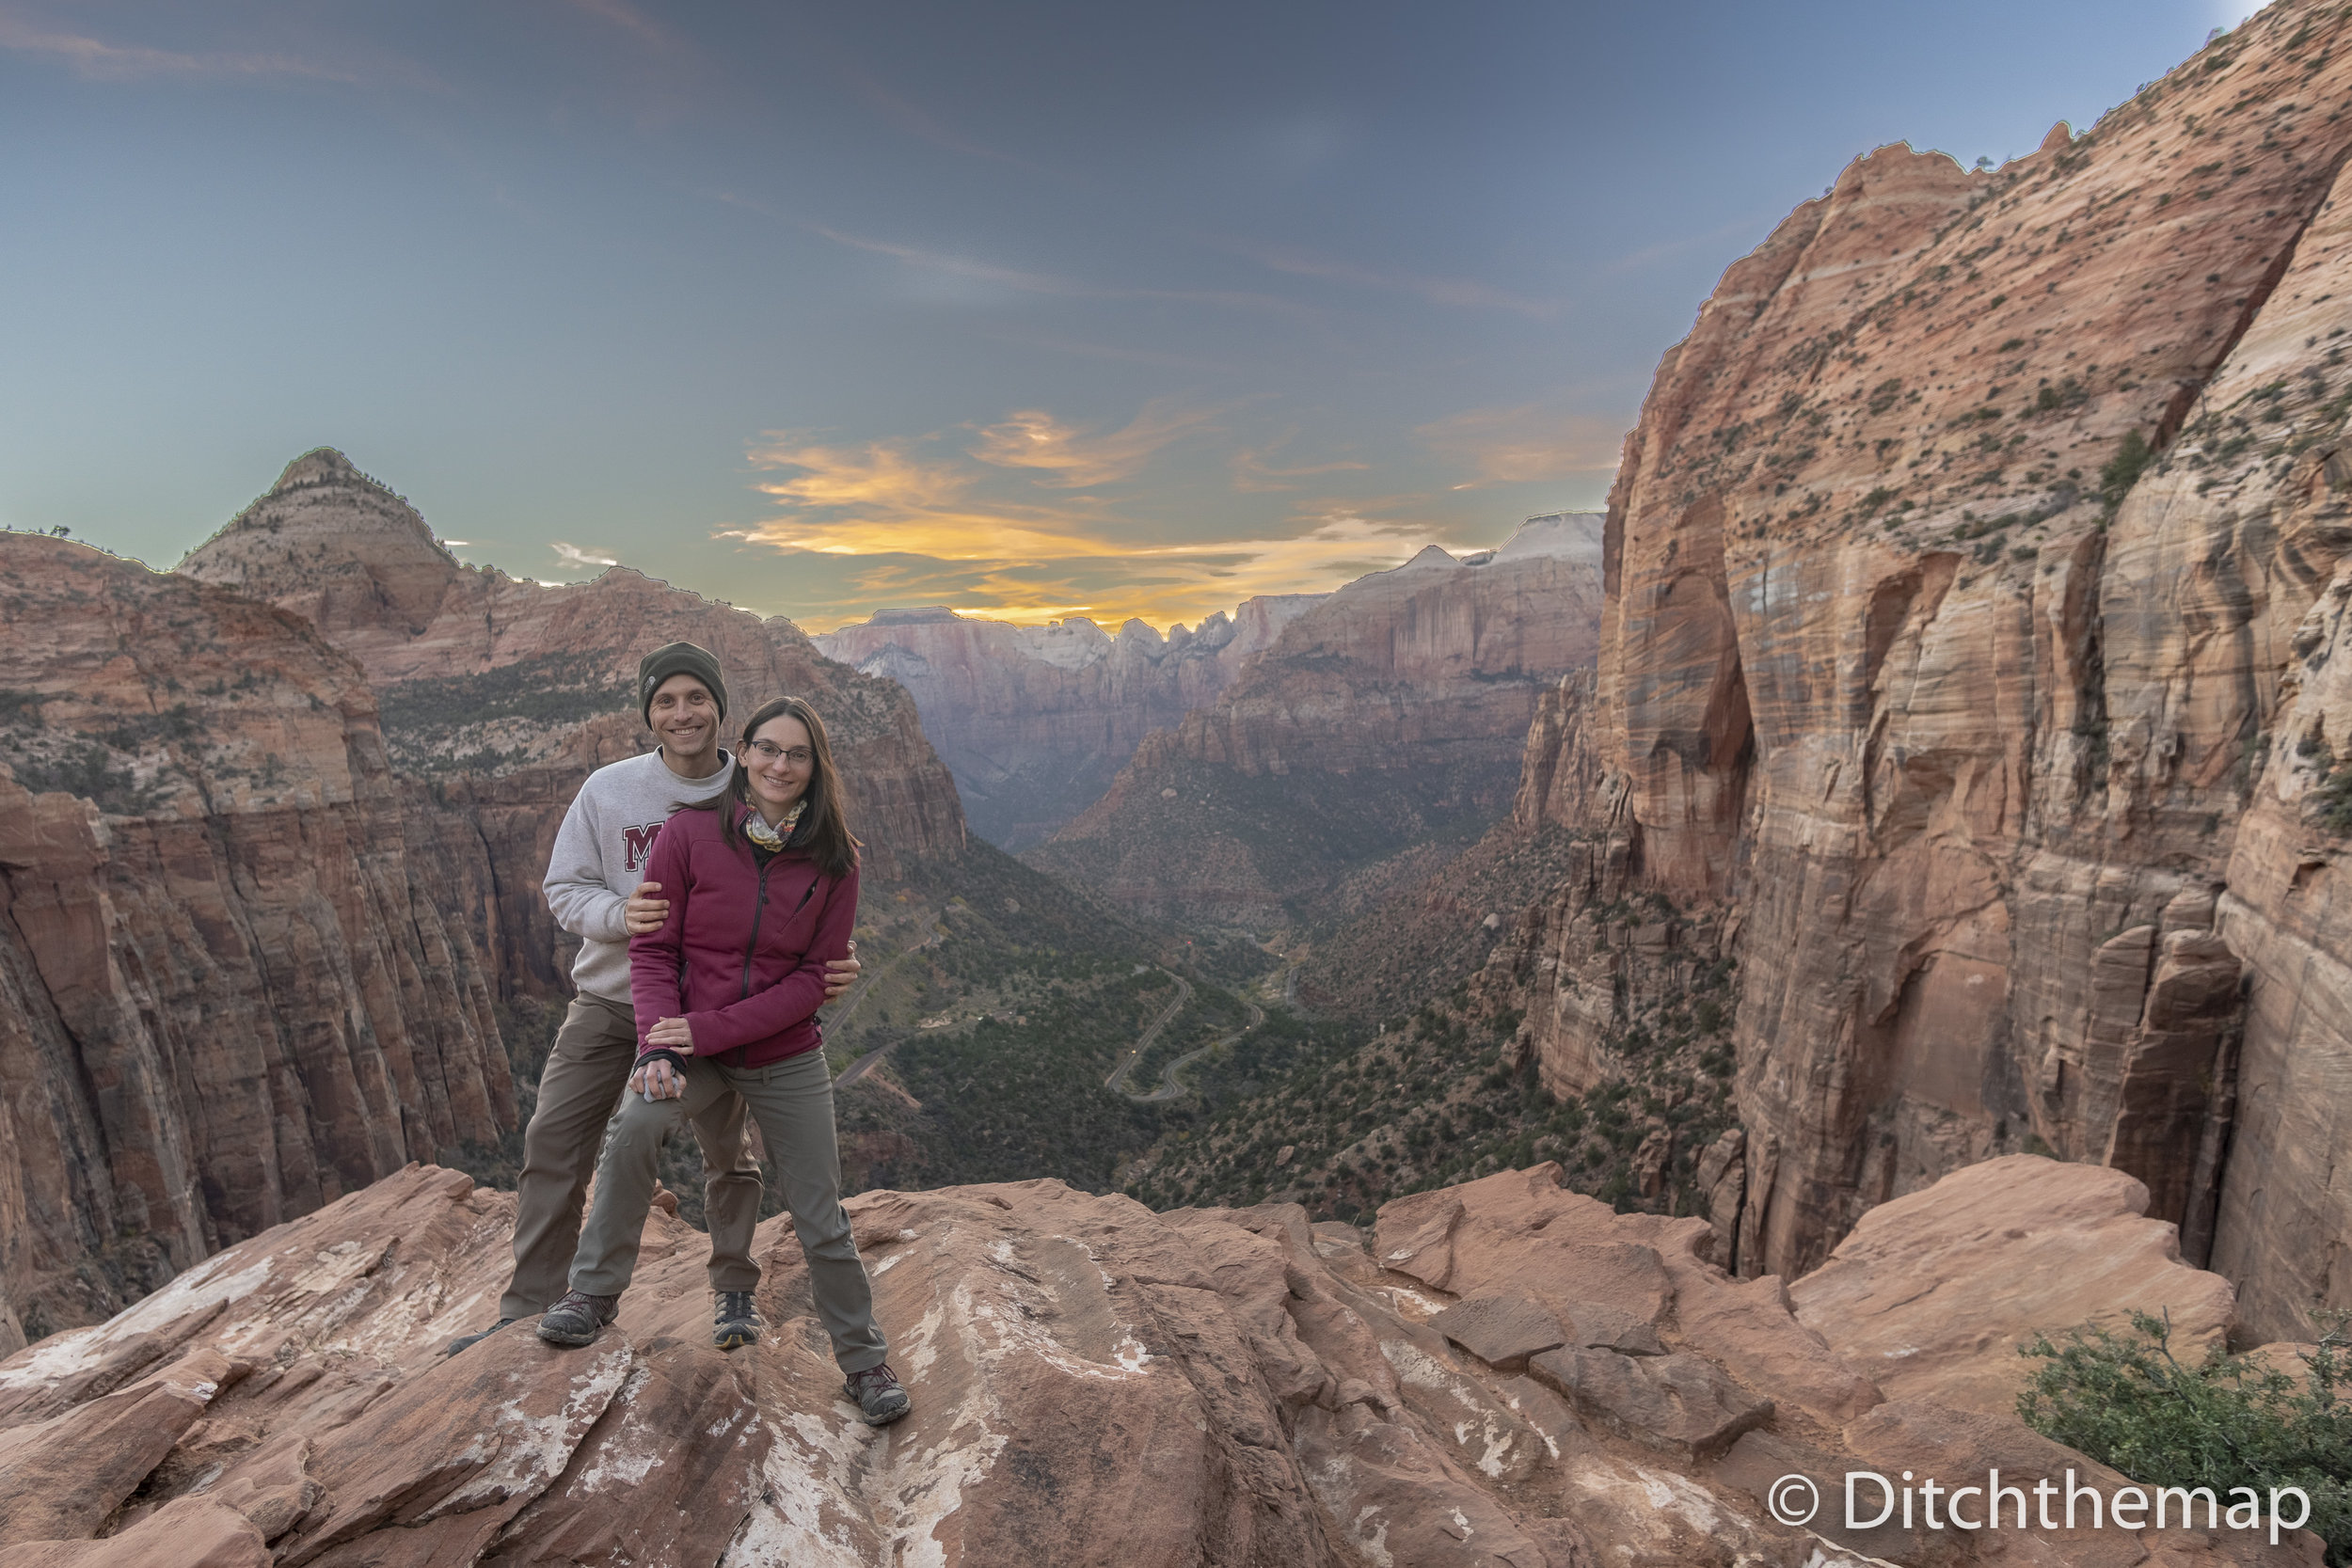 Stay safe by avoiding the busy road and check out the views from . An Overview Of Zion Nation Park S Top 2 Hikes The Narrows Angel S Landing Travel Blog And World Class Photography Travel Blog Ditch The Map